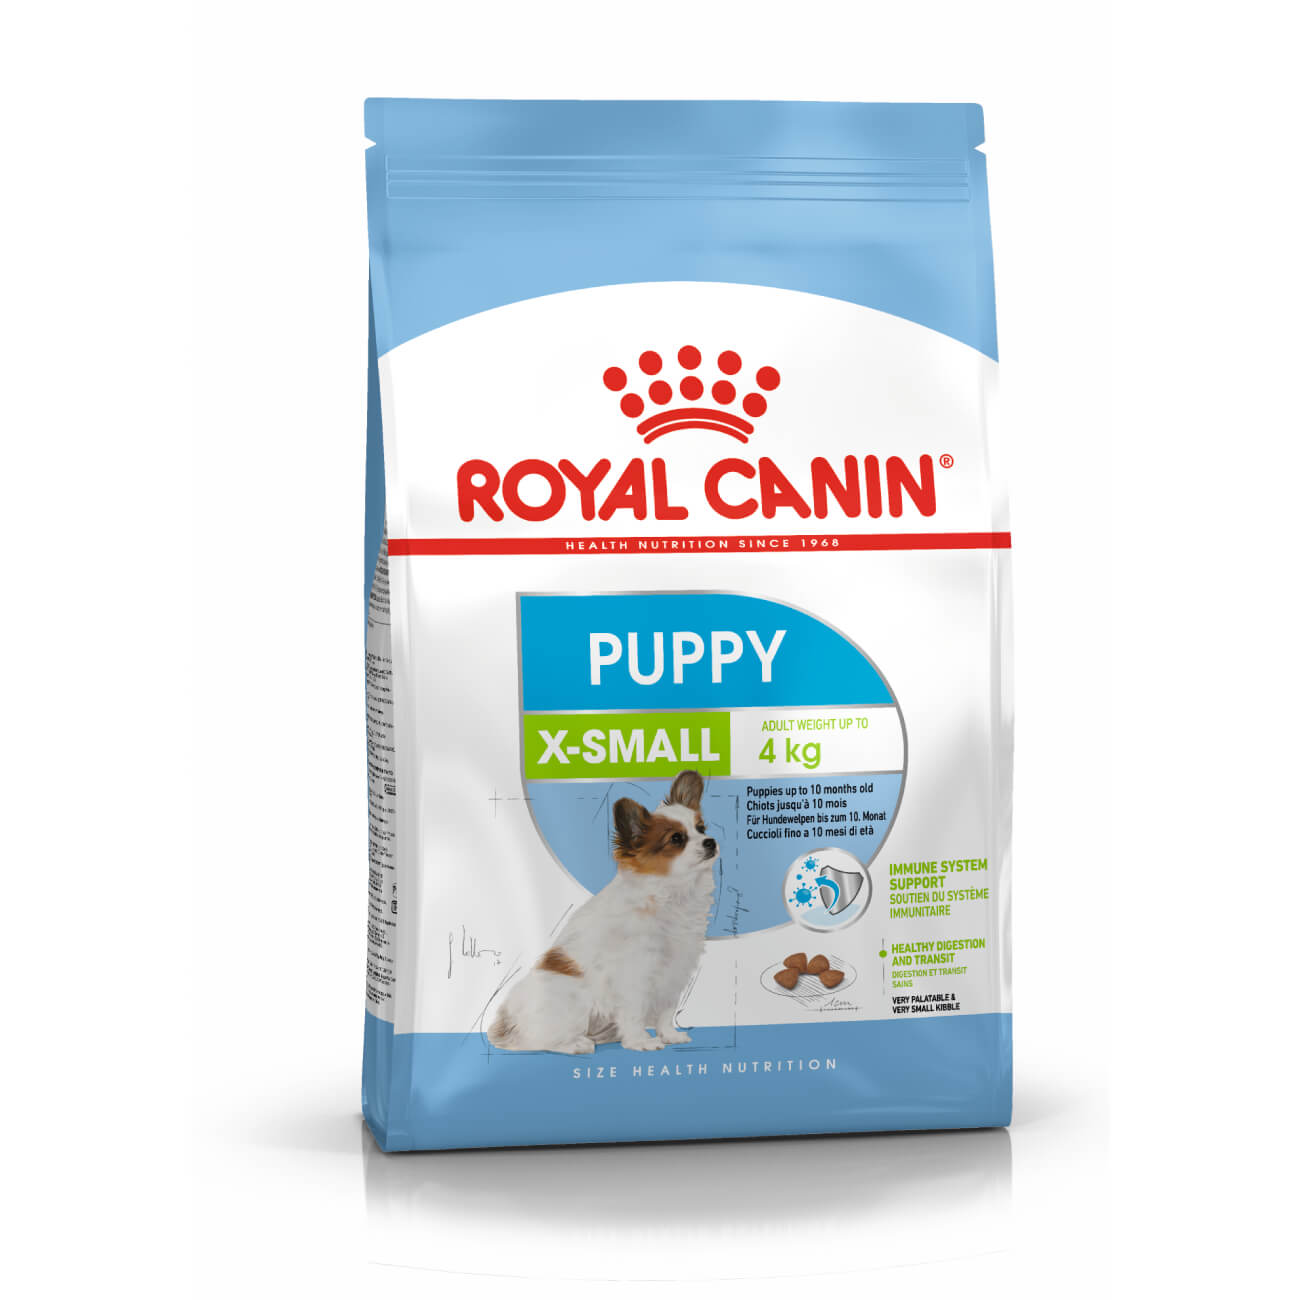 Royal Canin Puppy X-Small 1,5 kg